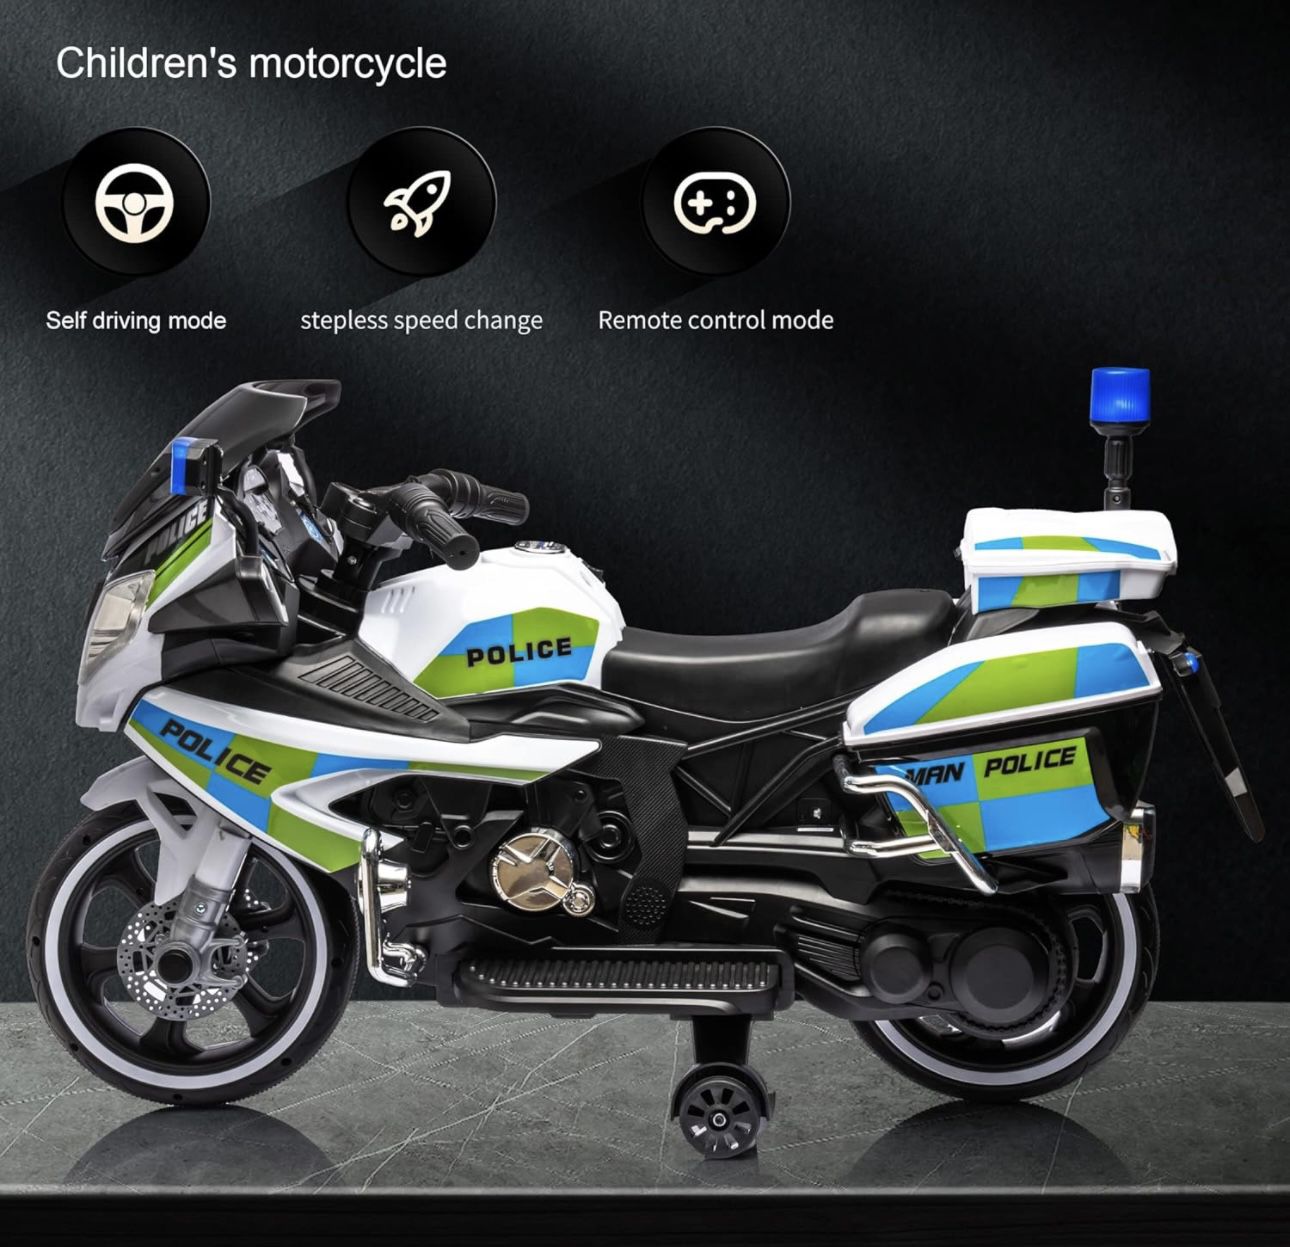 Kids Ride on Motorcycle,12V Toddler Motorized Ride on Toys,Police Electric Motorcycle with Training Wheels,Forward/Reverse,Alarm Lights,Power Display,